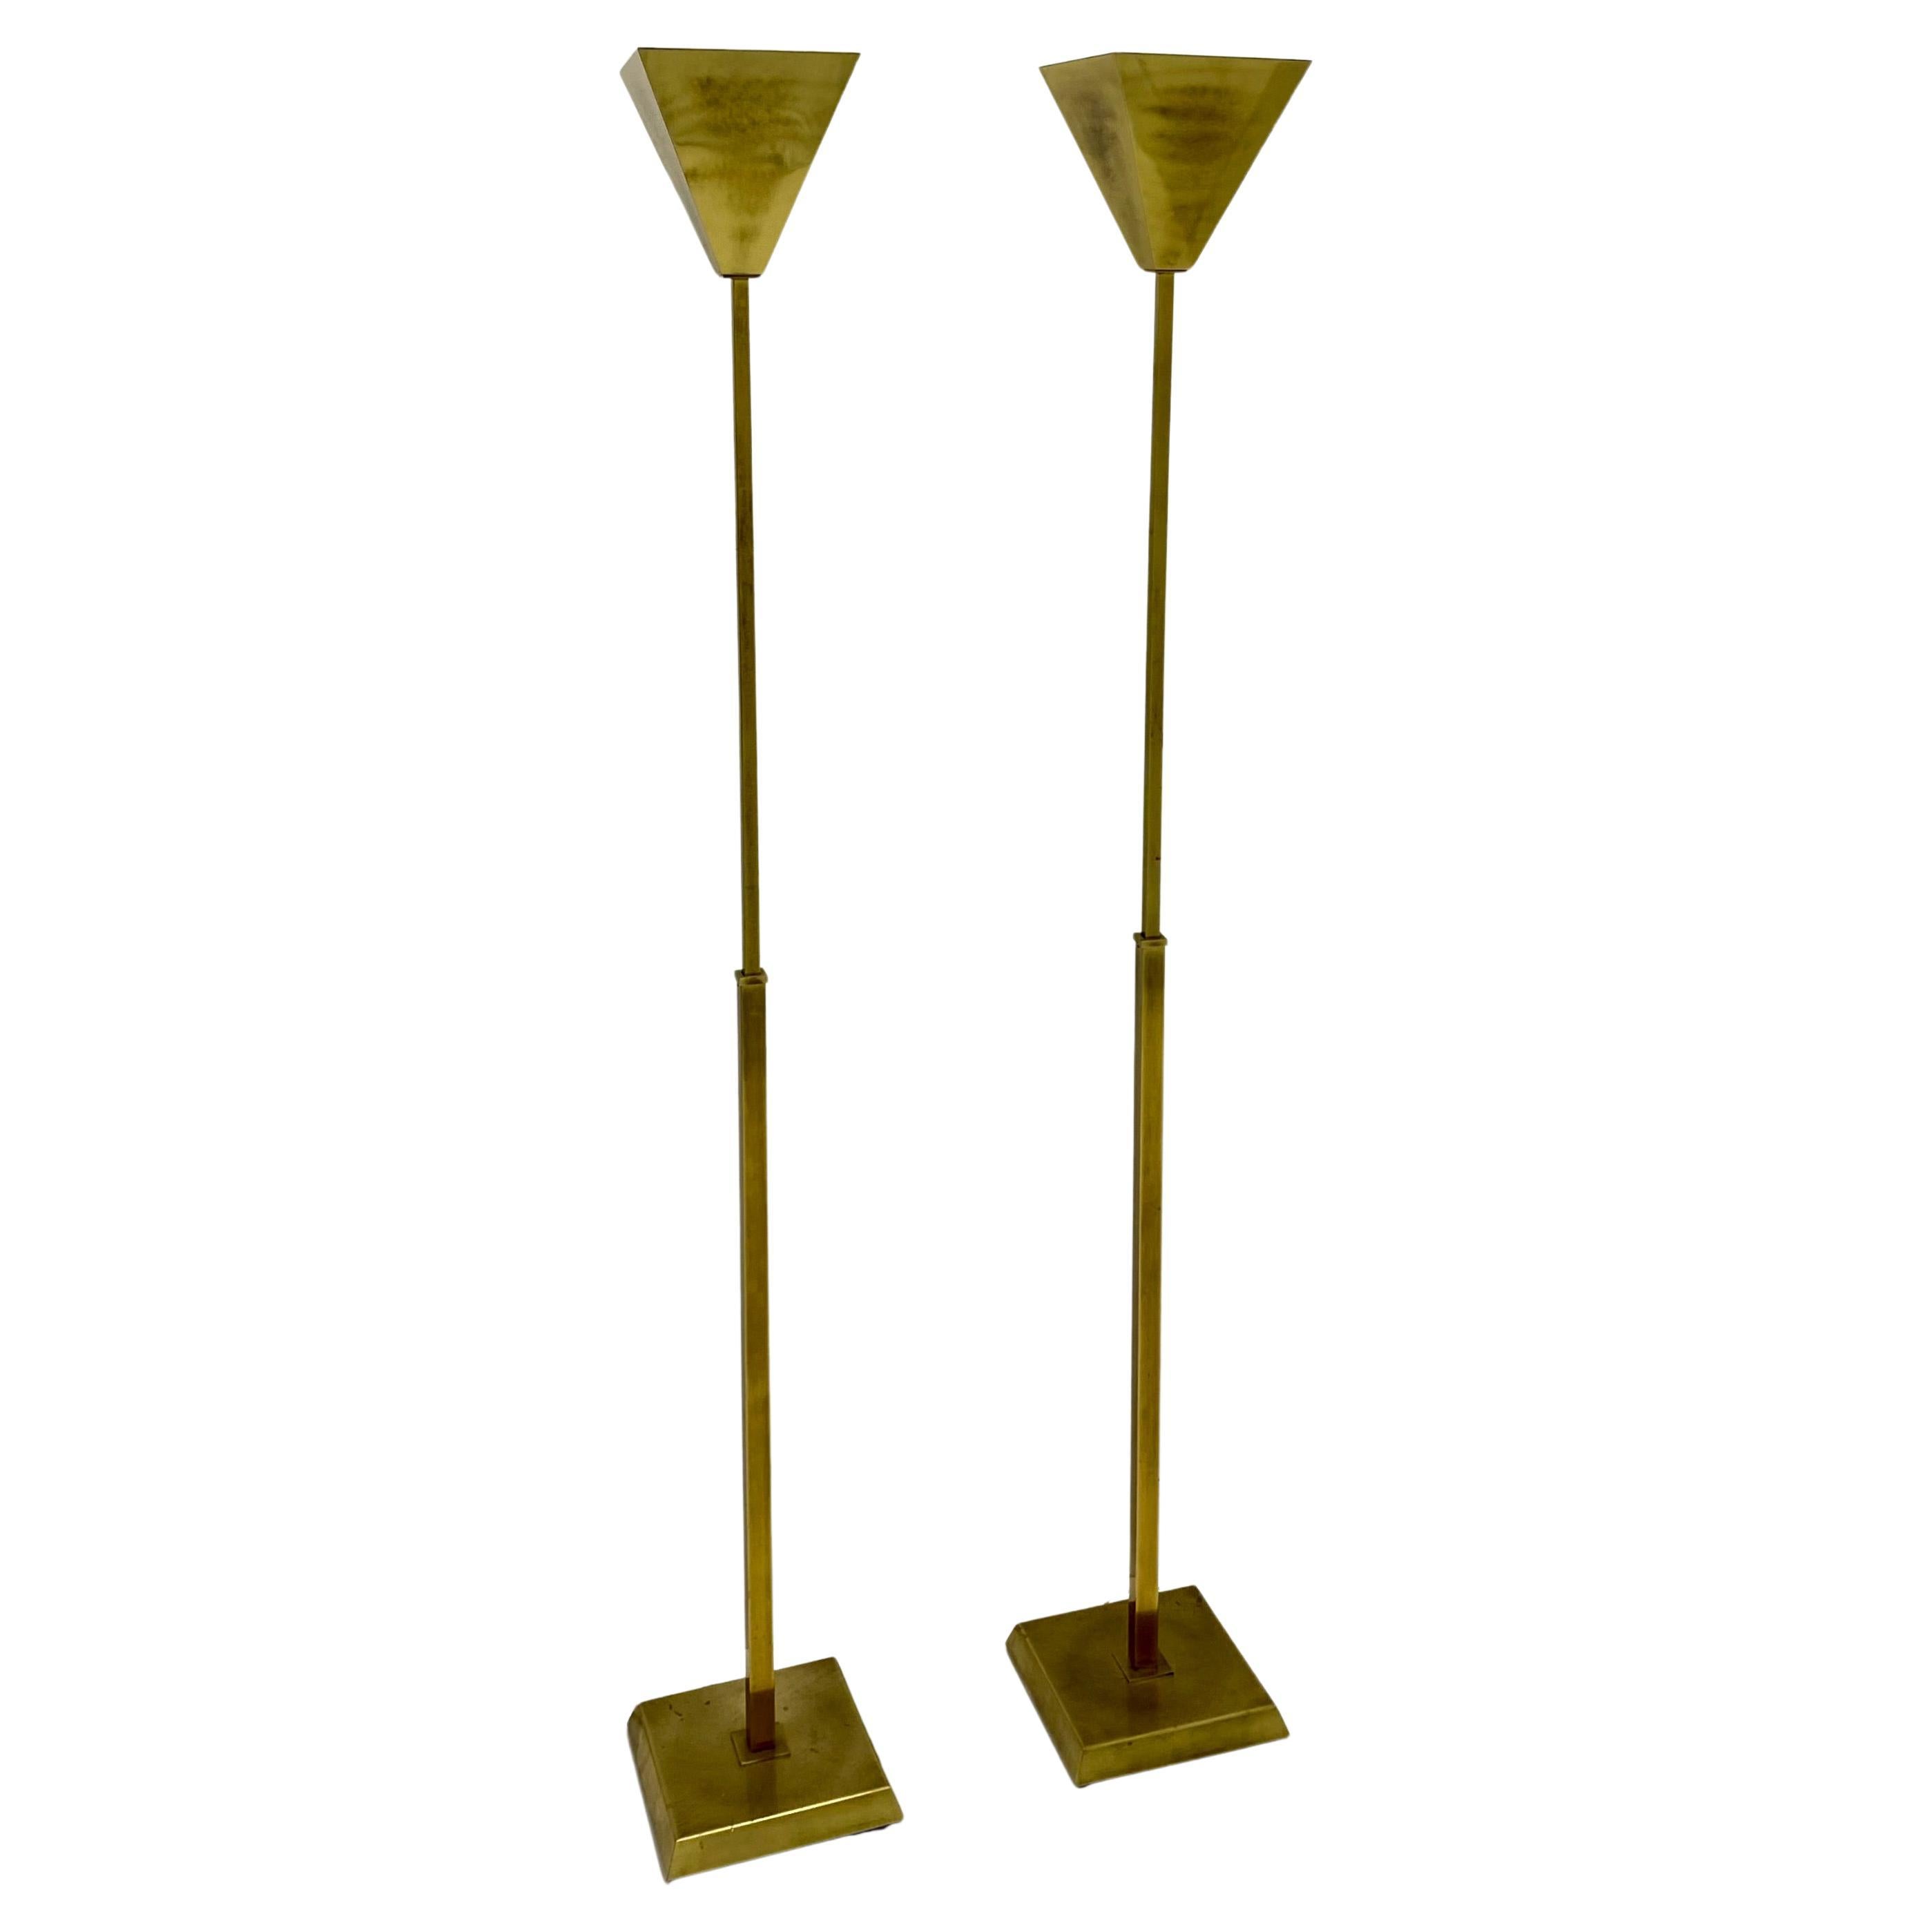 This is a pair of mid-century modern adjustable floor lamps with uplight feature. They adjust from 50” to 65”. The cone shaped portion is 8” square and tall. They are in very good condition.

My shipping is for the Continental US only. 